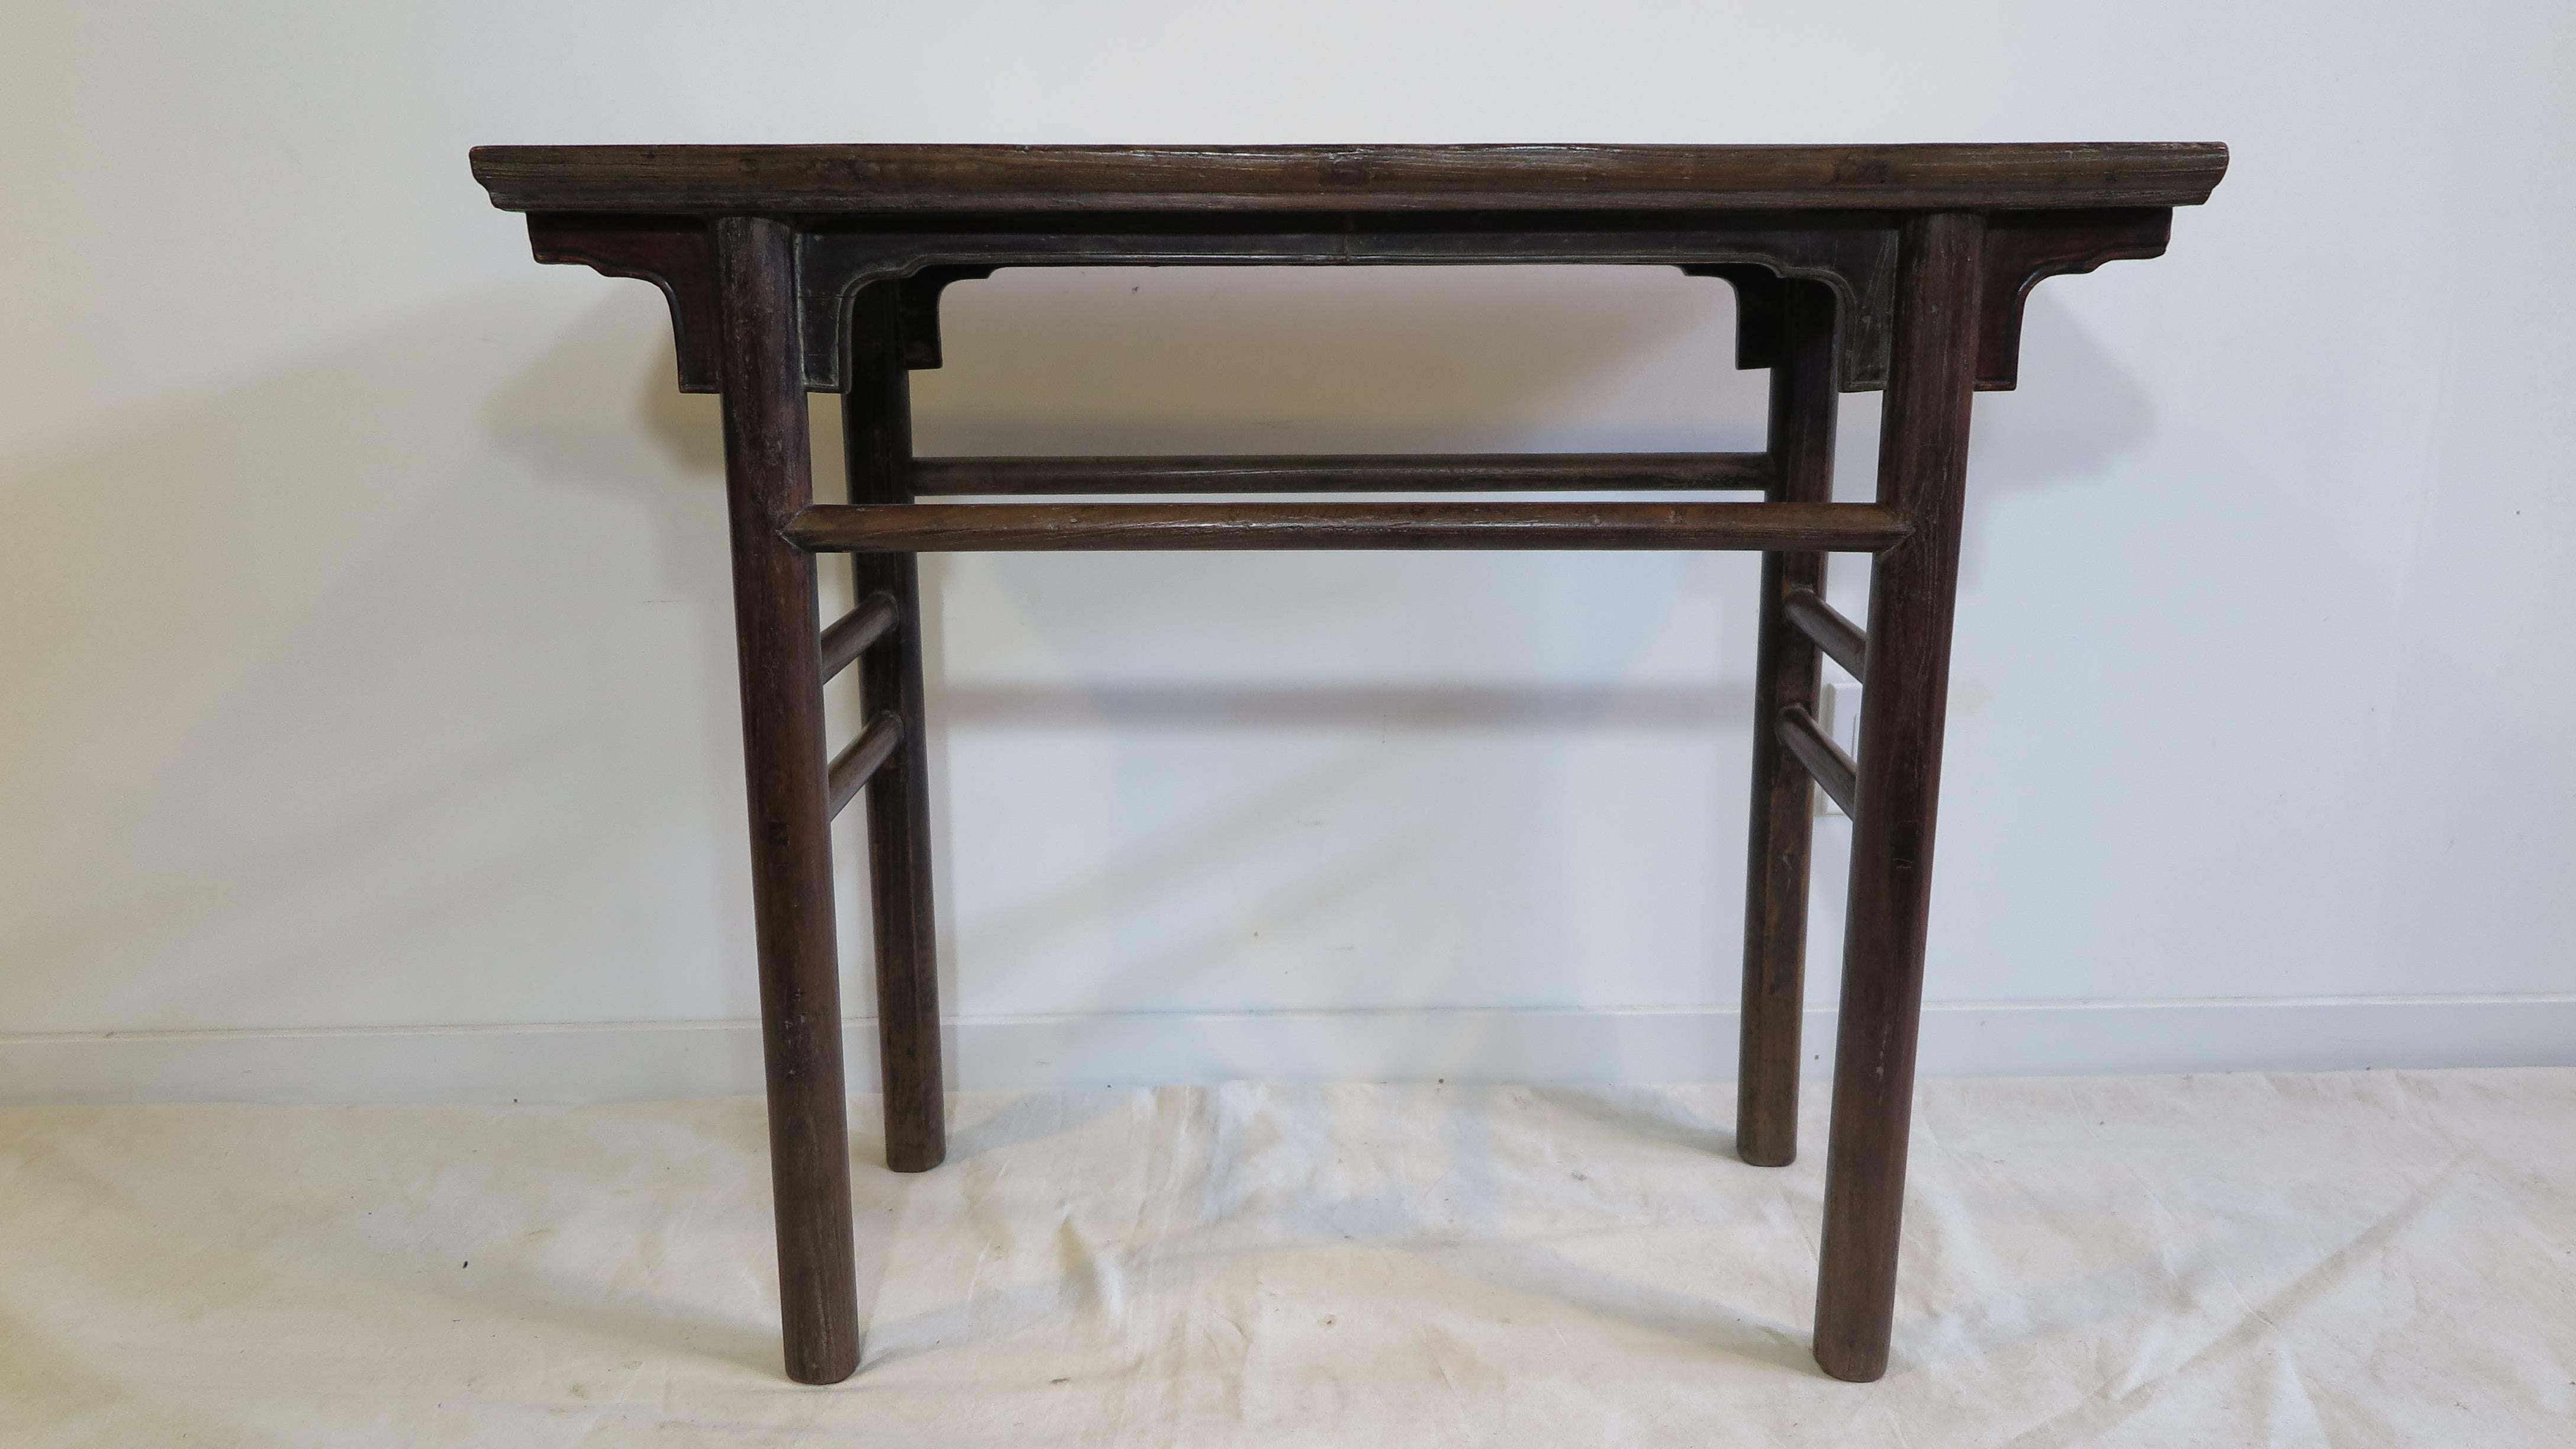 A 19th century Chinese console table, also referred to as a wine table.  Old growth Northern elm wood. Very solid. Having apron with spandrels, and uniform cylindrical round legs. This piece has a both a rustic appeal from natural aging and the